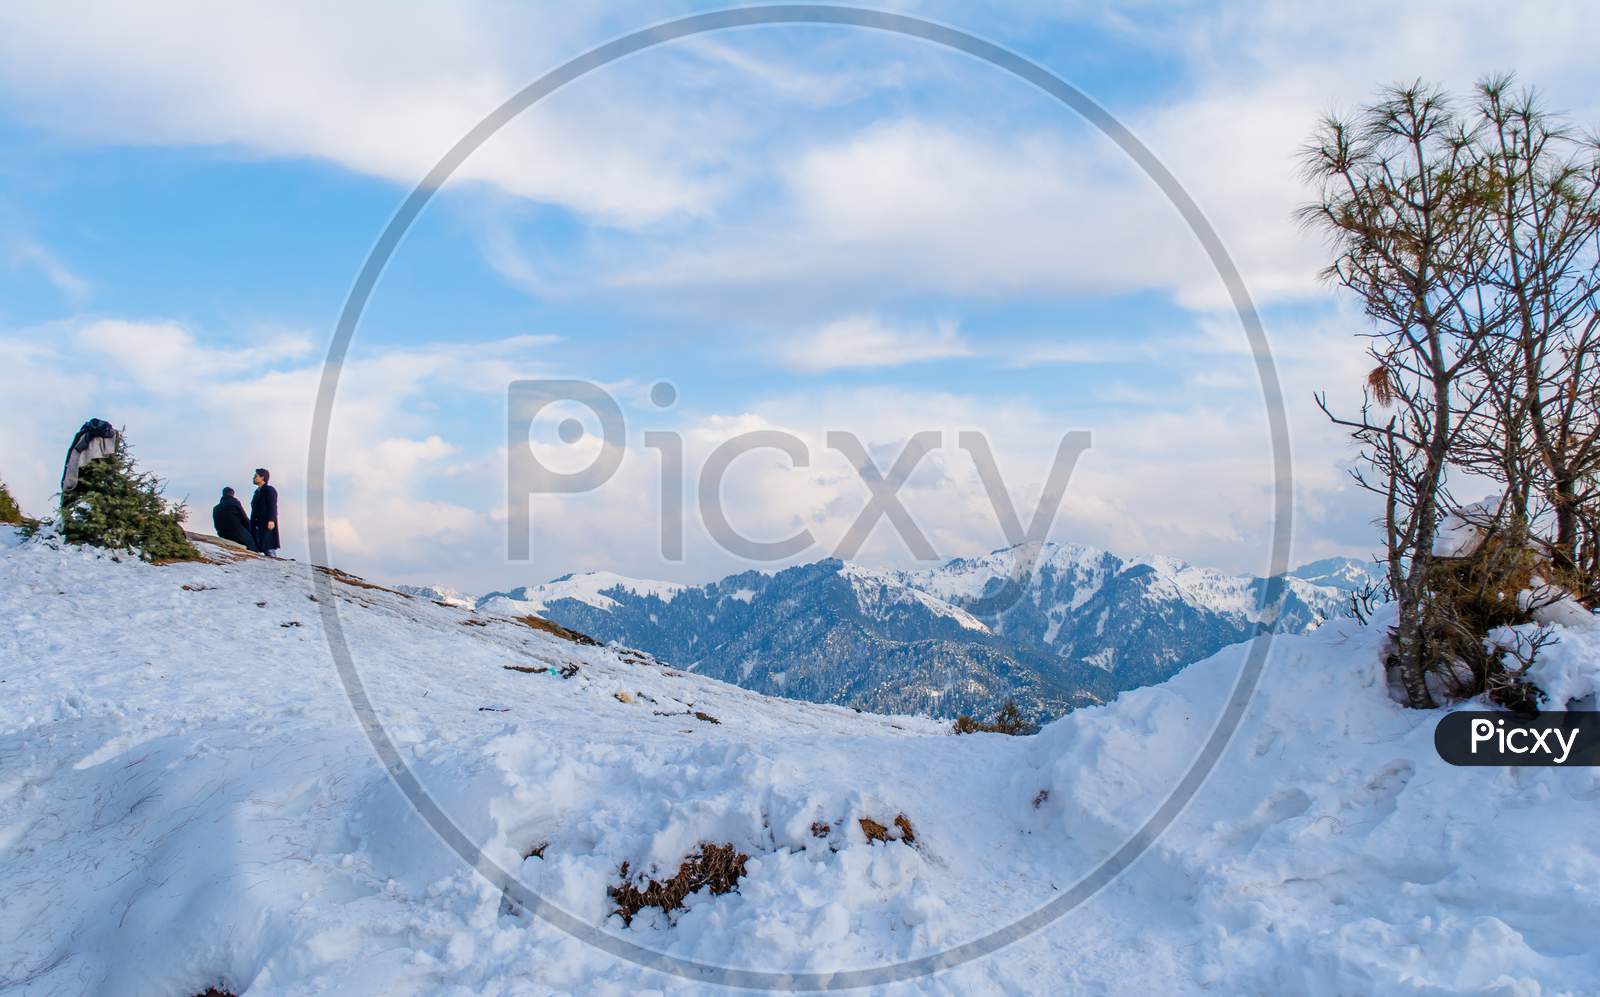 Nathatop and Patnitop cities of Jammu and its park covered with white snow, Winter landscape